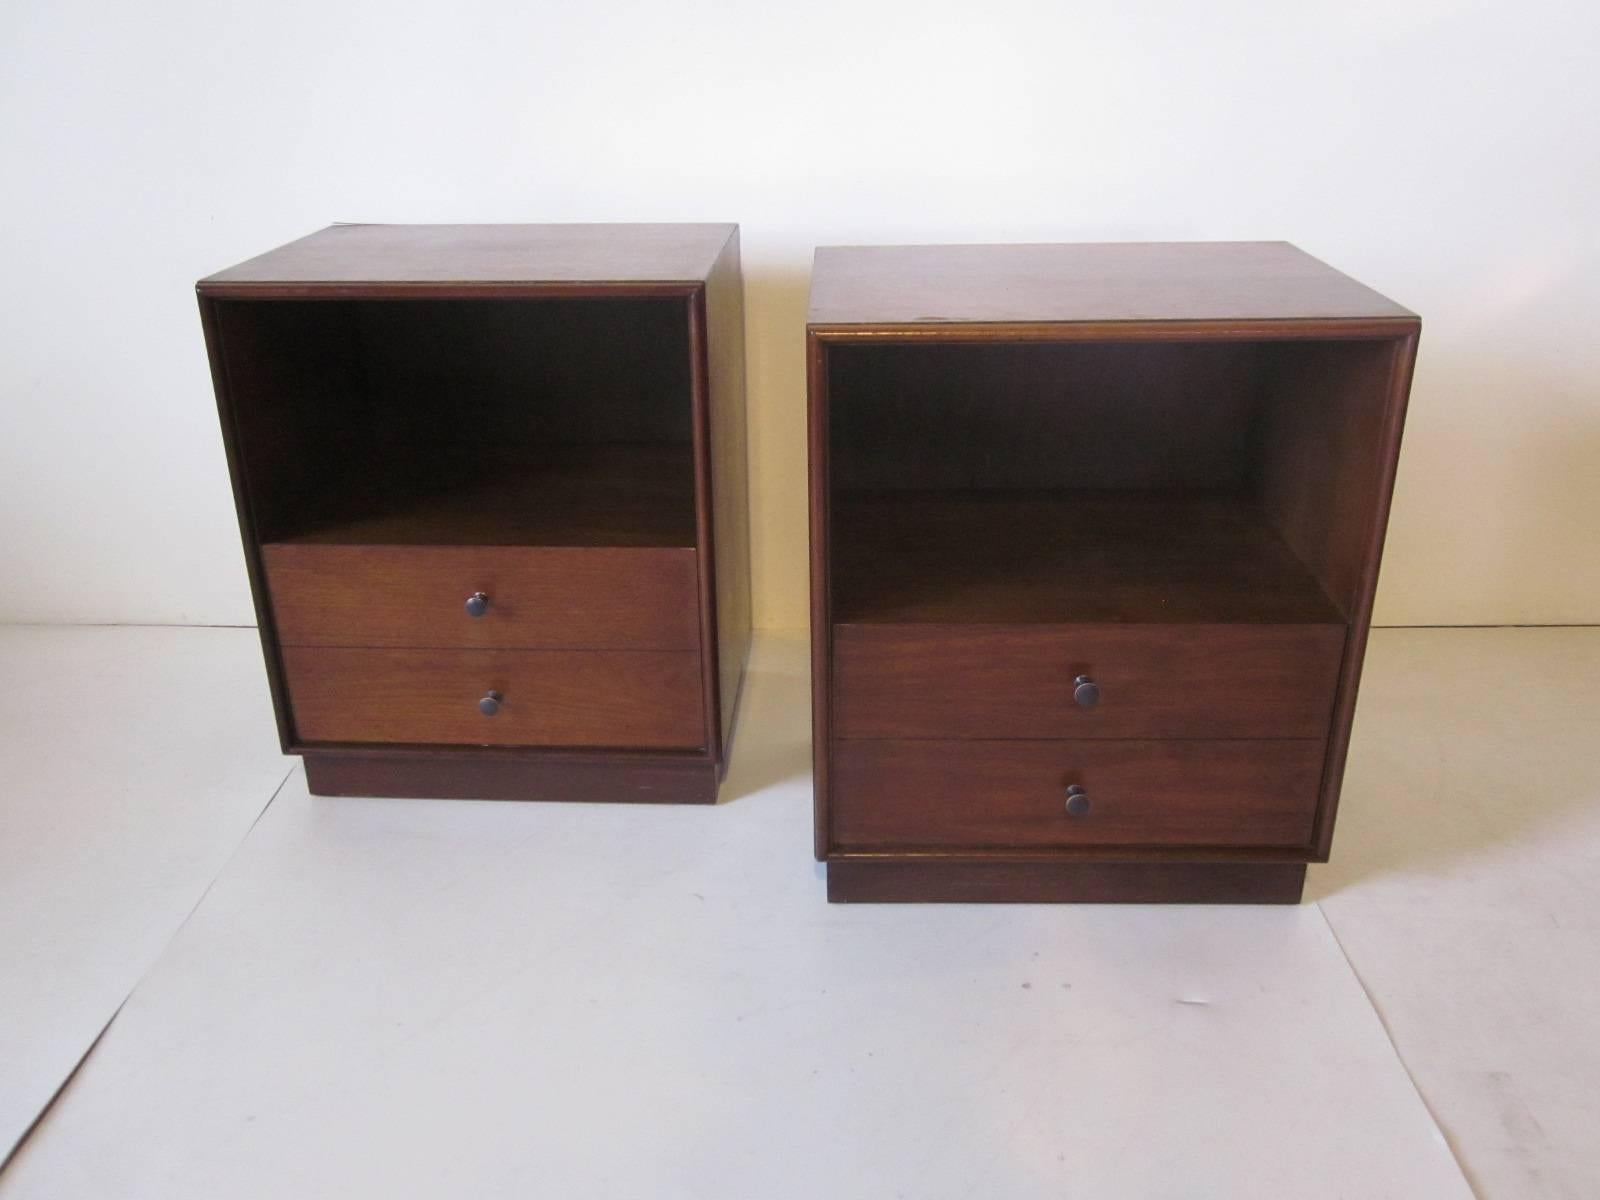 A pair of Mid-Century nightstands in dark walnut with lower single drawer and bronze styled pulls with upper storage area in the style of Harvey Probber.